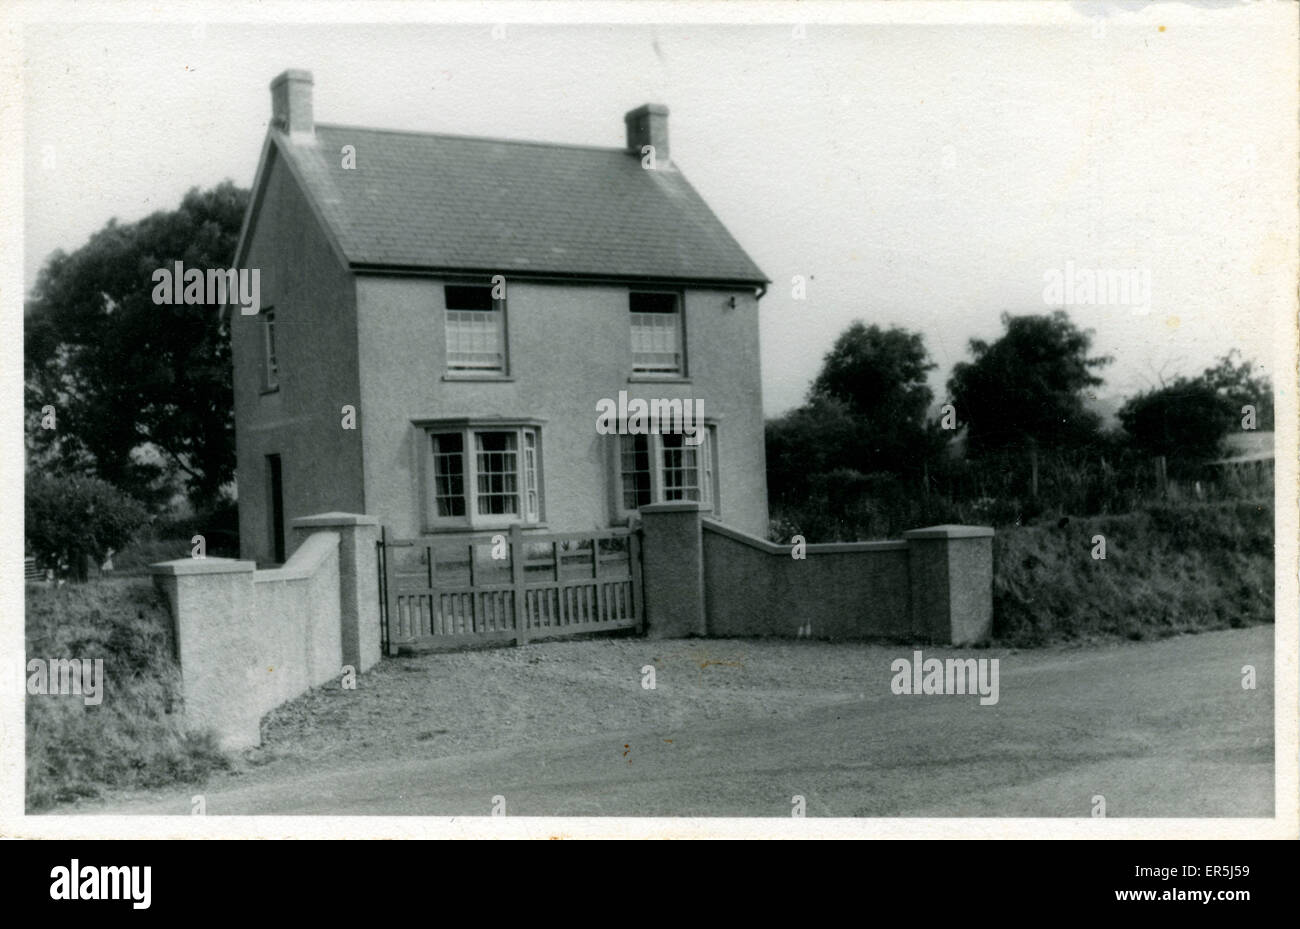 Detached House, Clarbeston Road, near Haverfordwest, Carmarthenshire, Wales.  1940s Stock Photo